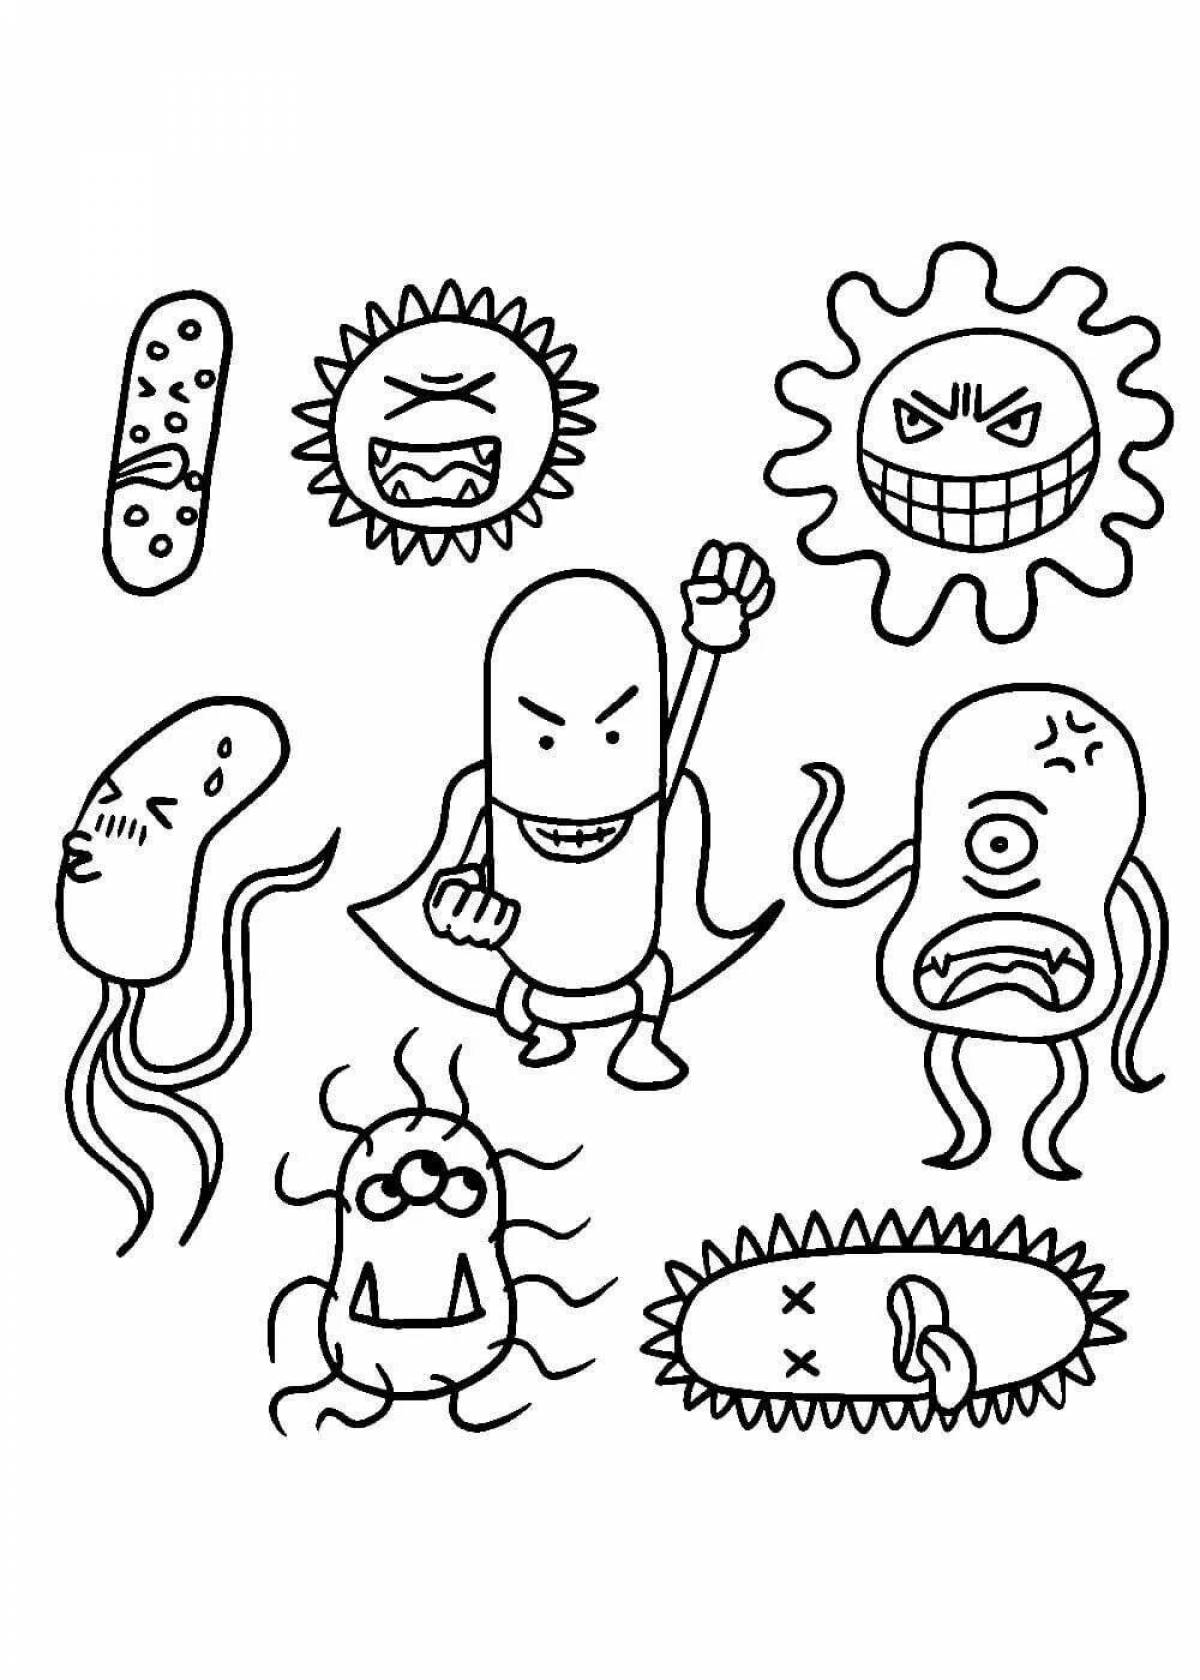 Playful germs coloring page for kids